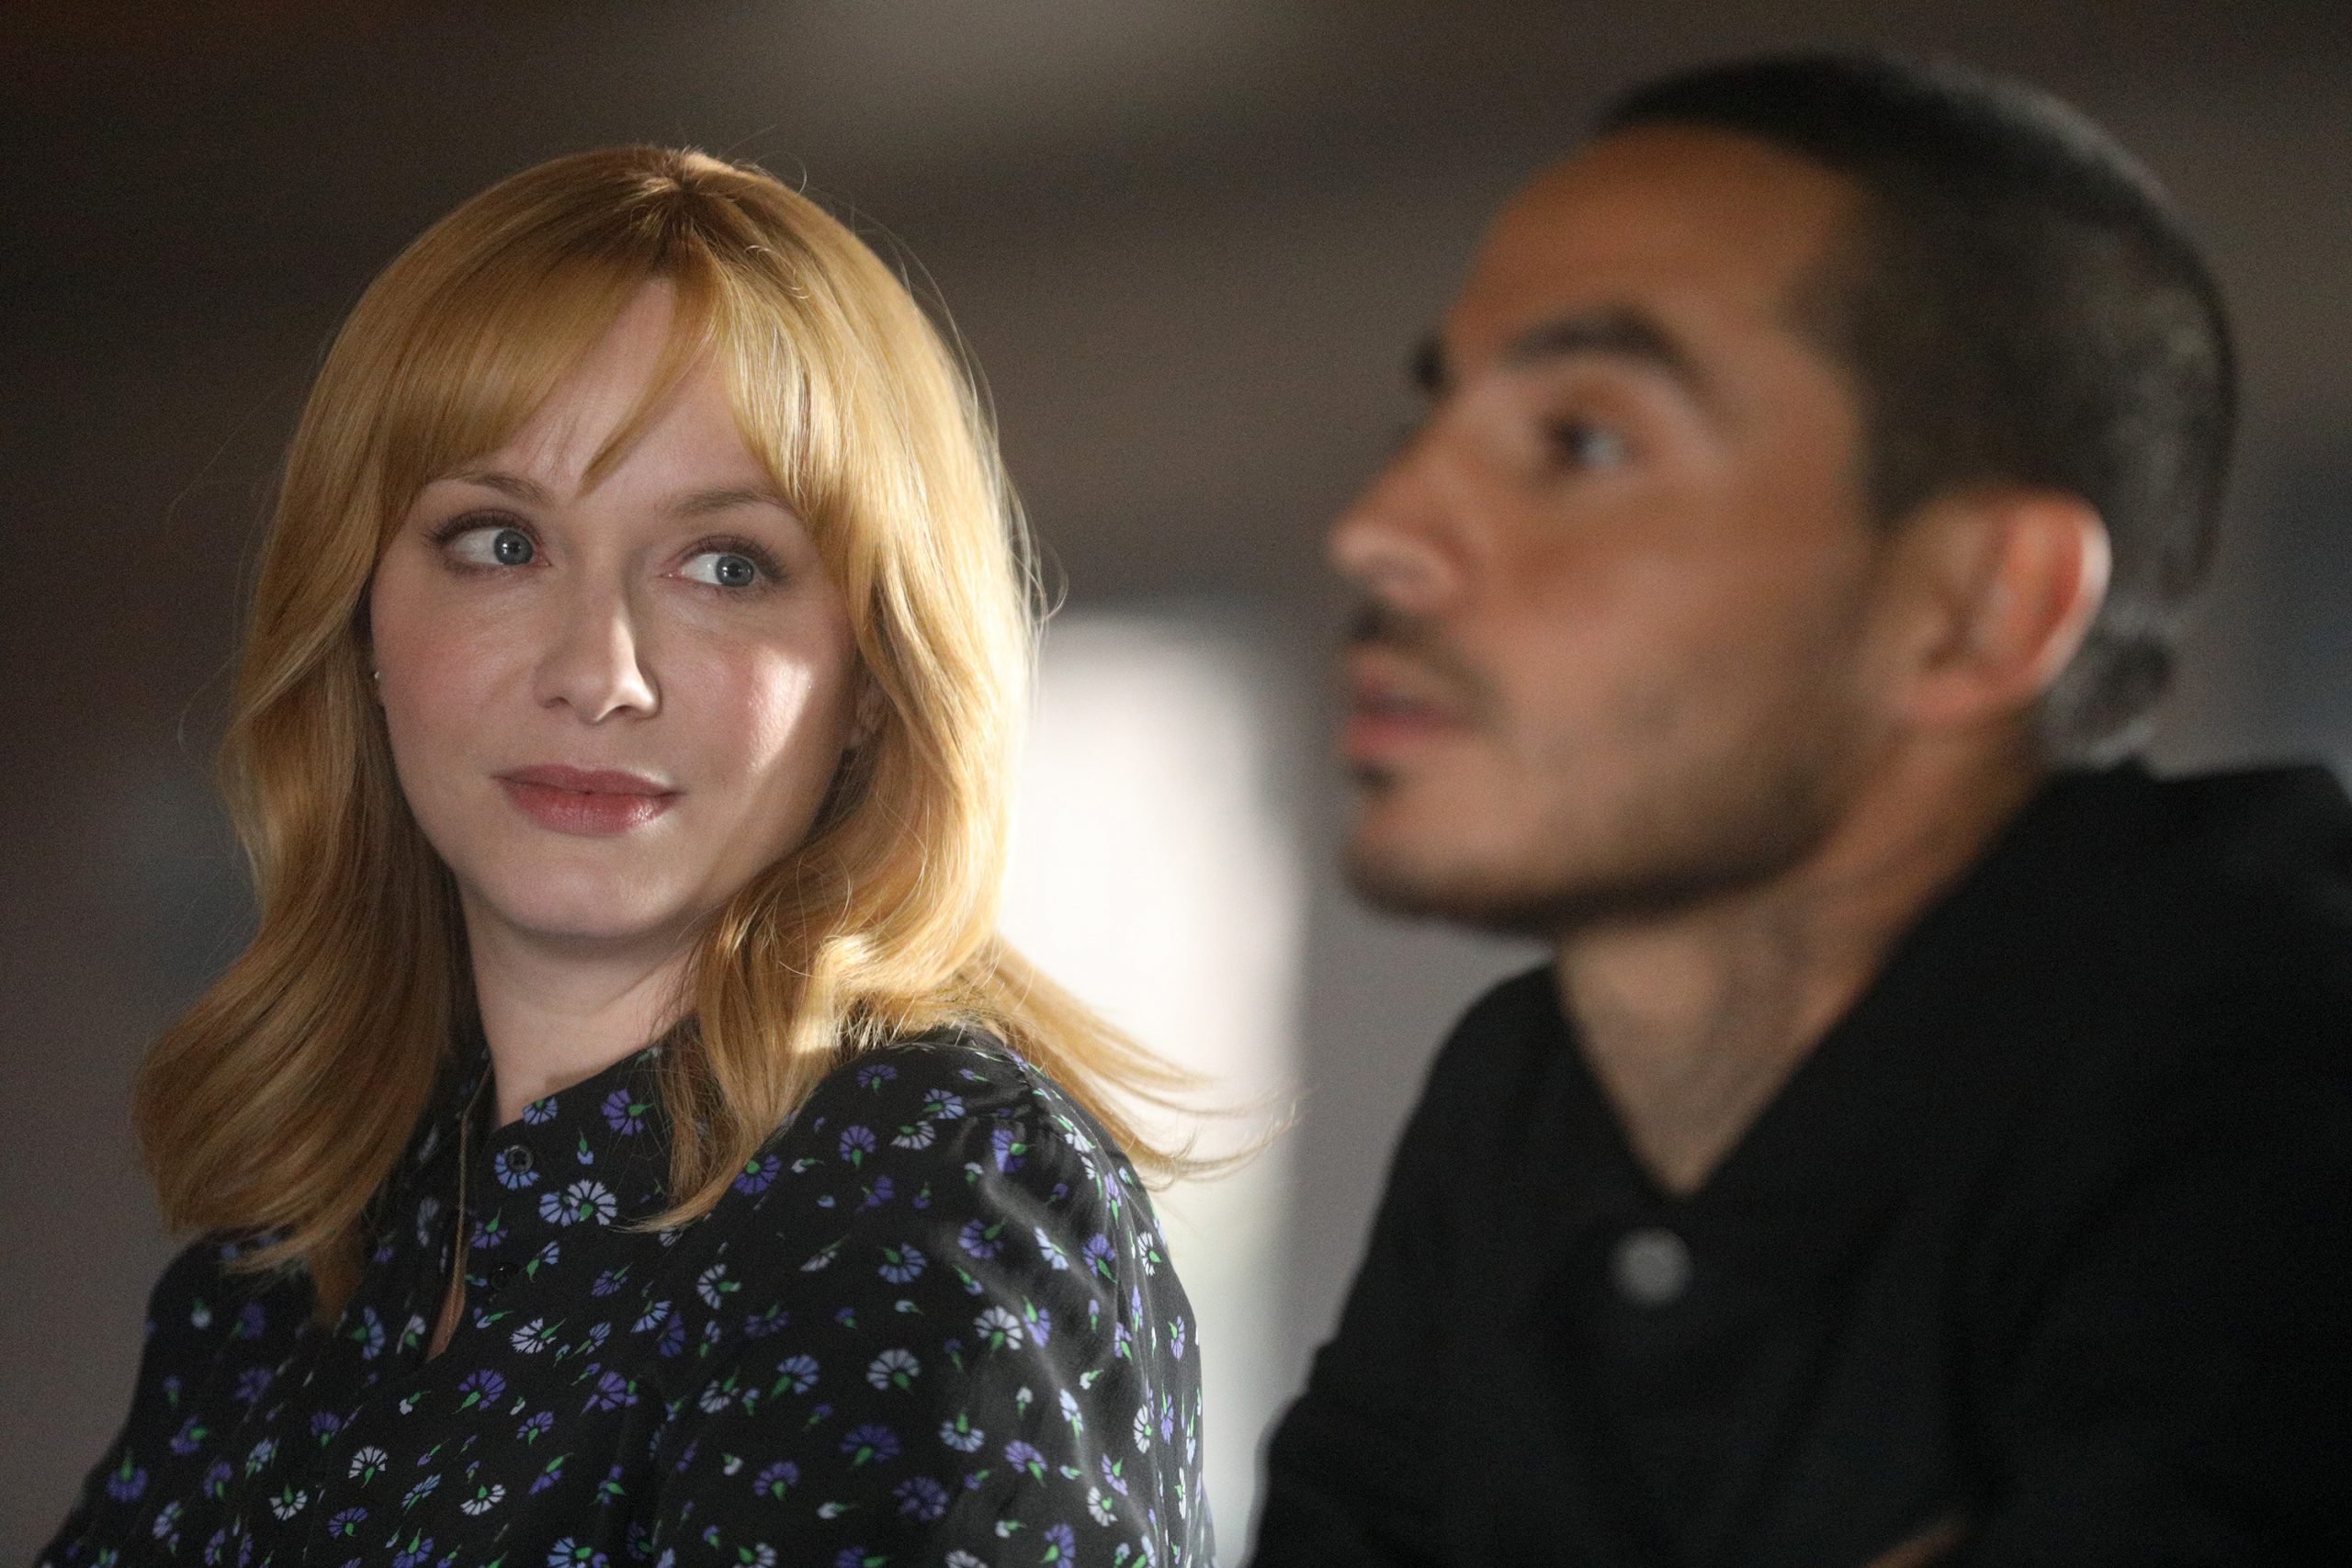 Christina Hendricks and Manny Montana filming a scene from 'Good Girls' as Beth and Rio